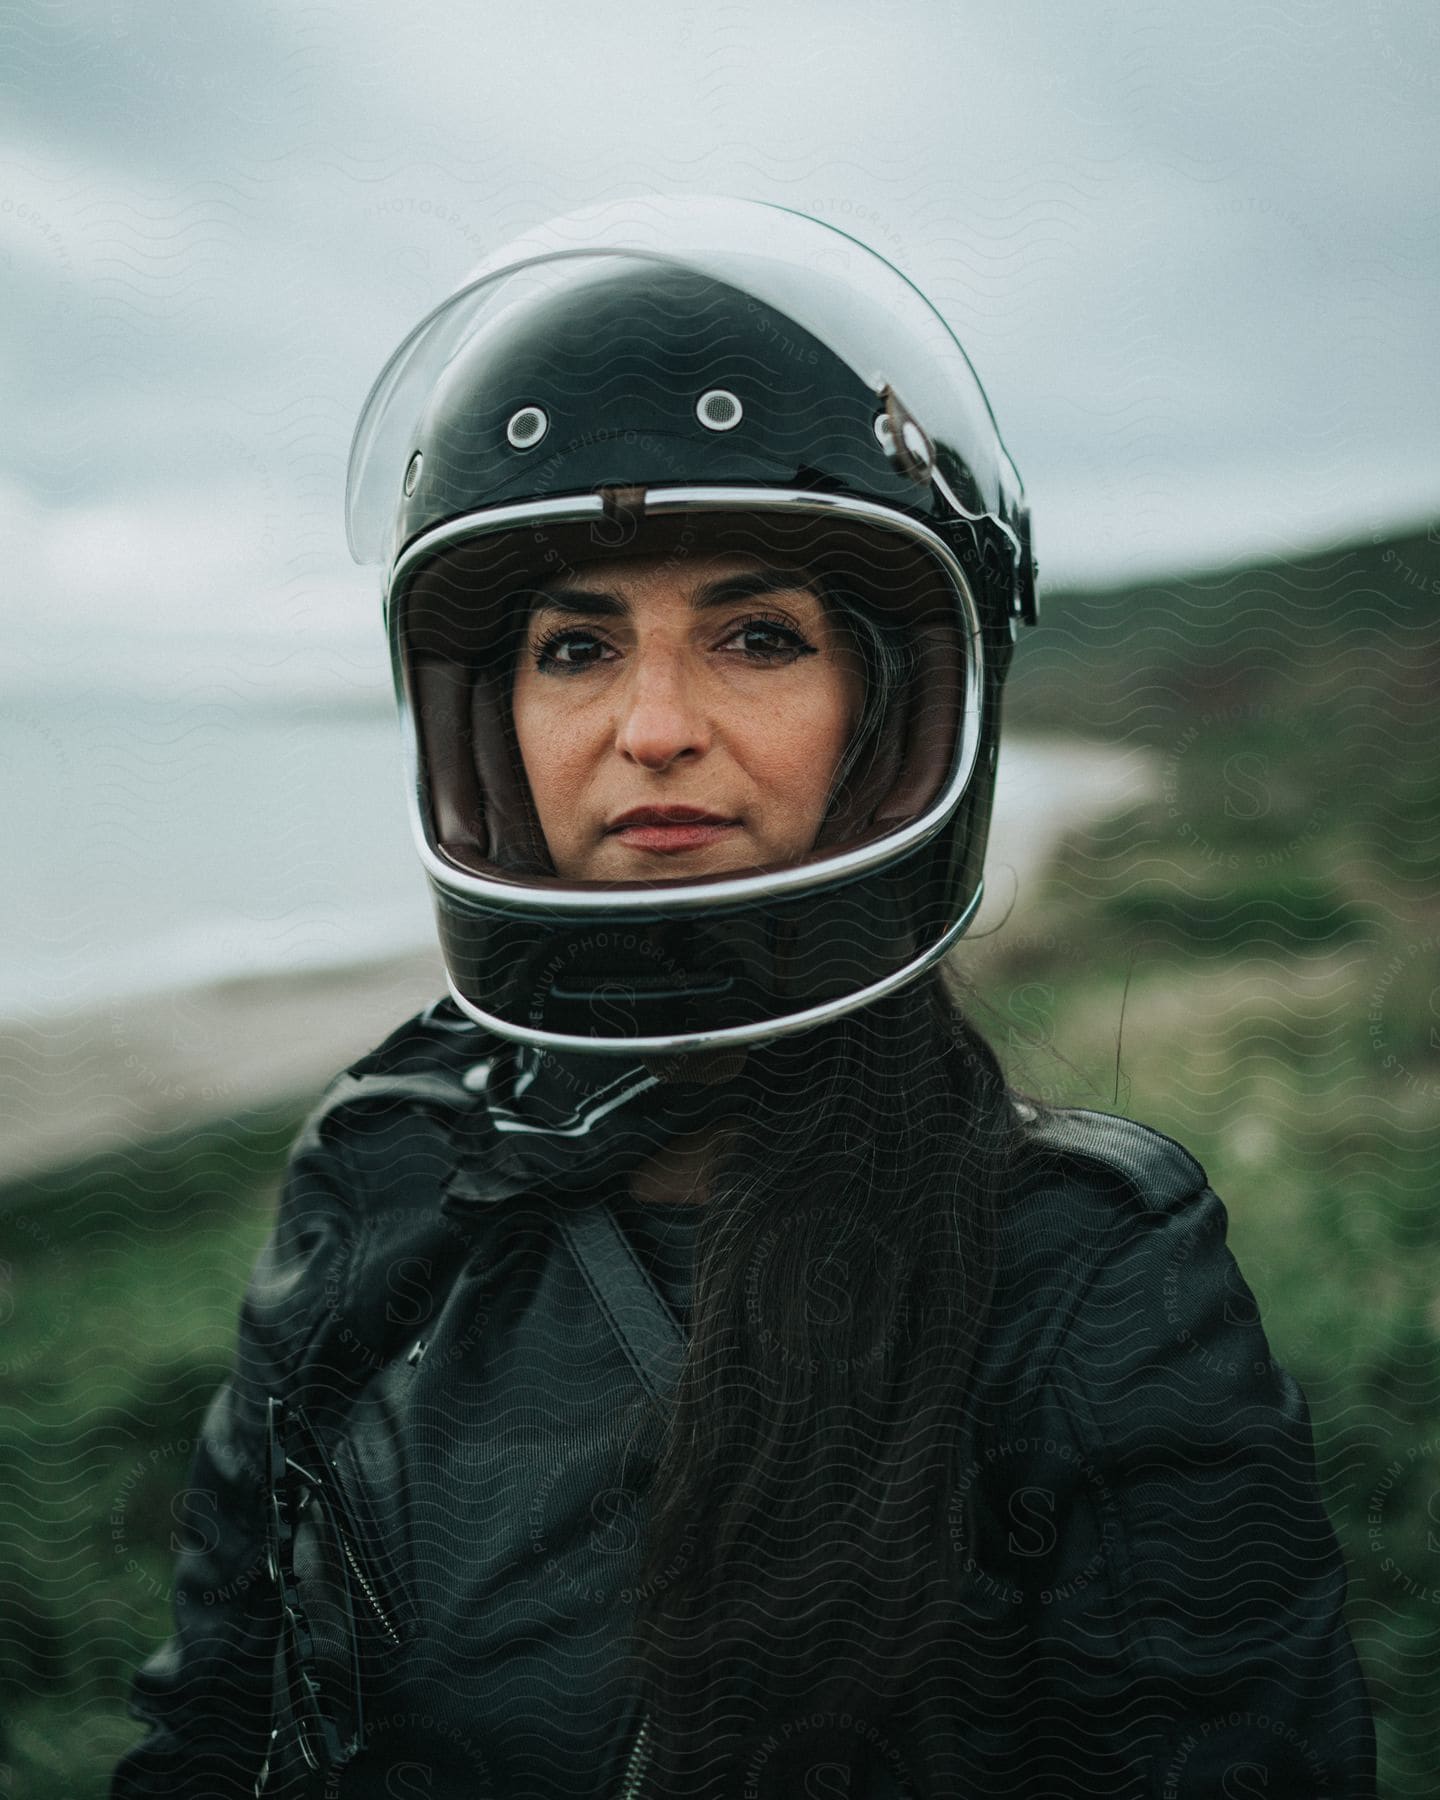 Woman wearing a black helmet and a black leather jacket stands on a hilltop with the coast in the background